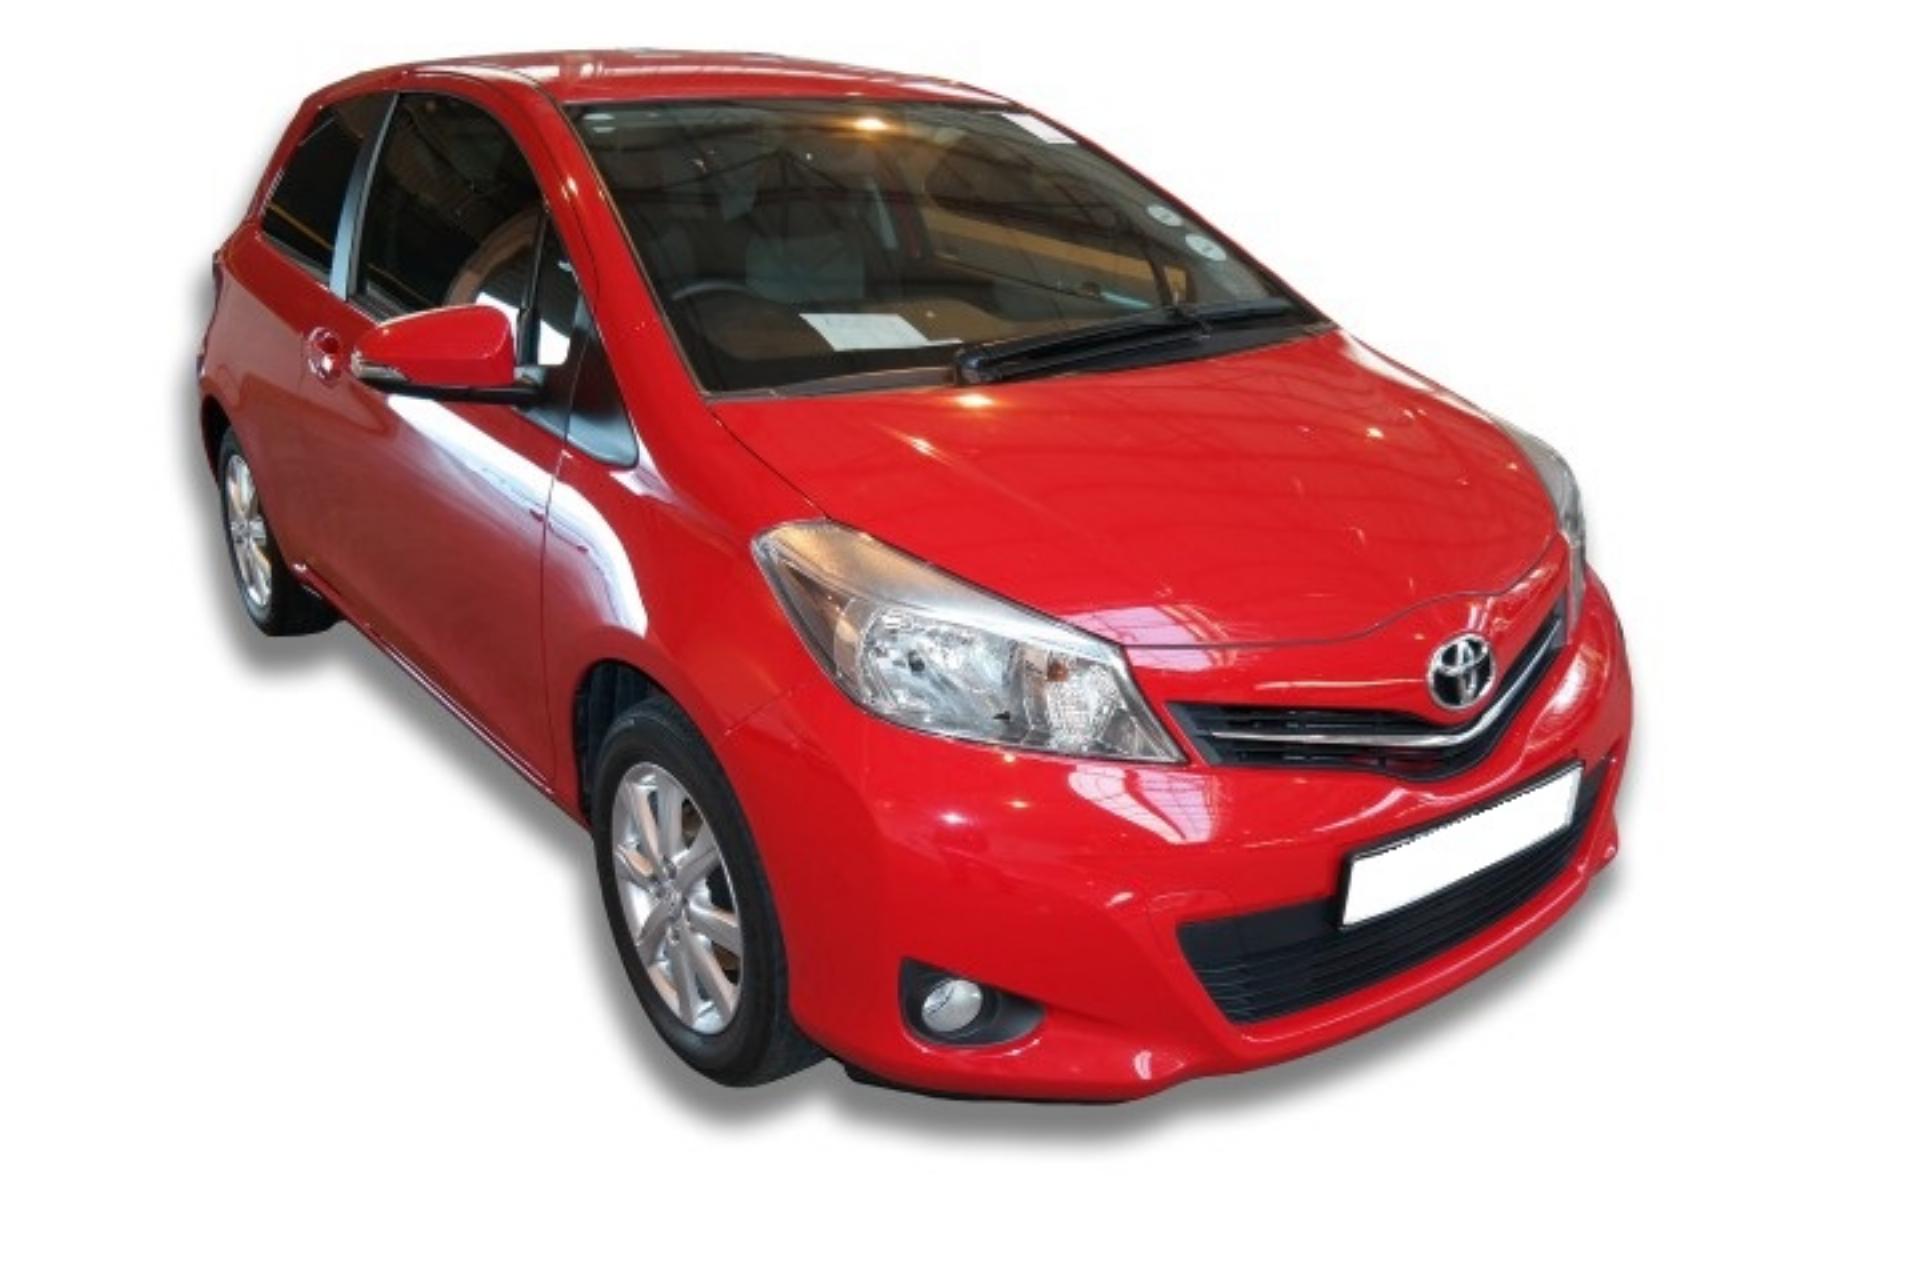 Repossessed Toyota Yaris 1.0 XR 3DR 2012 on auction - MC30441